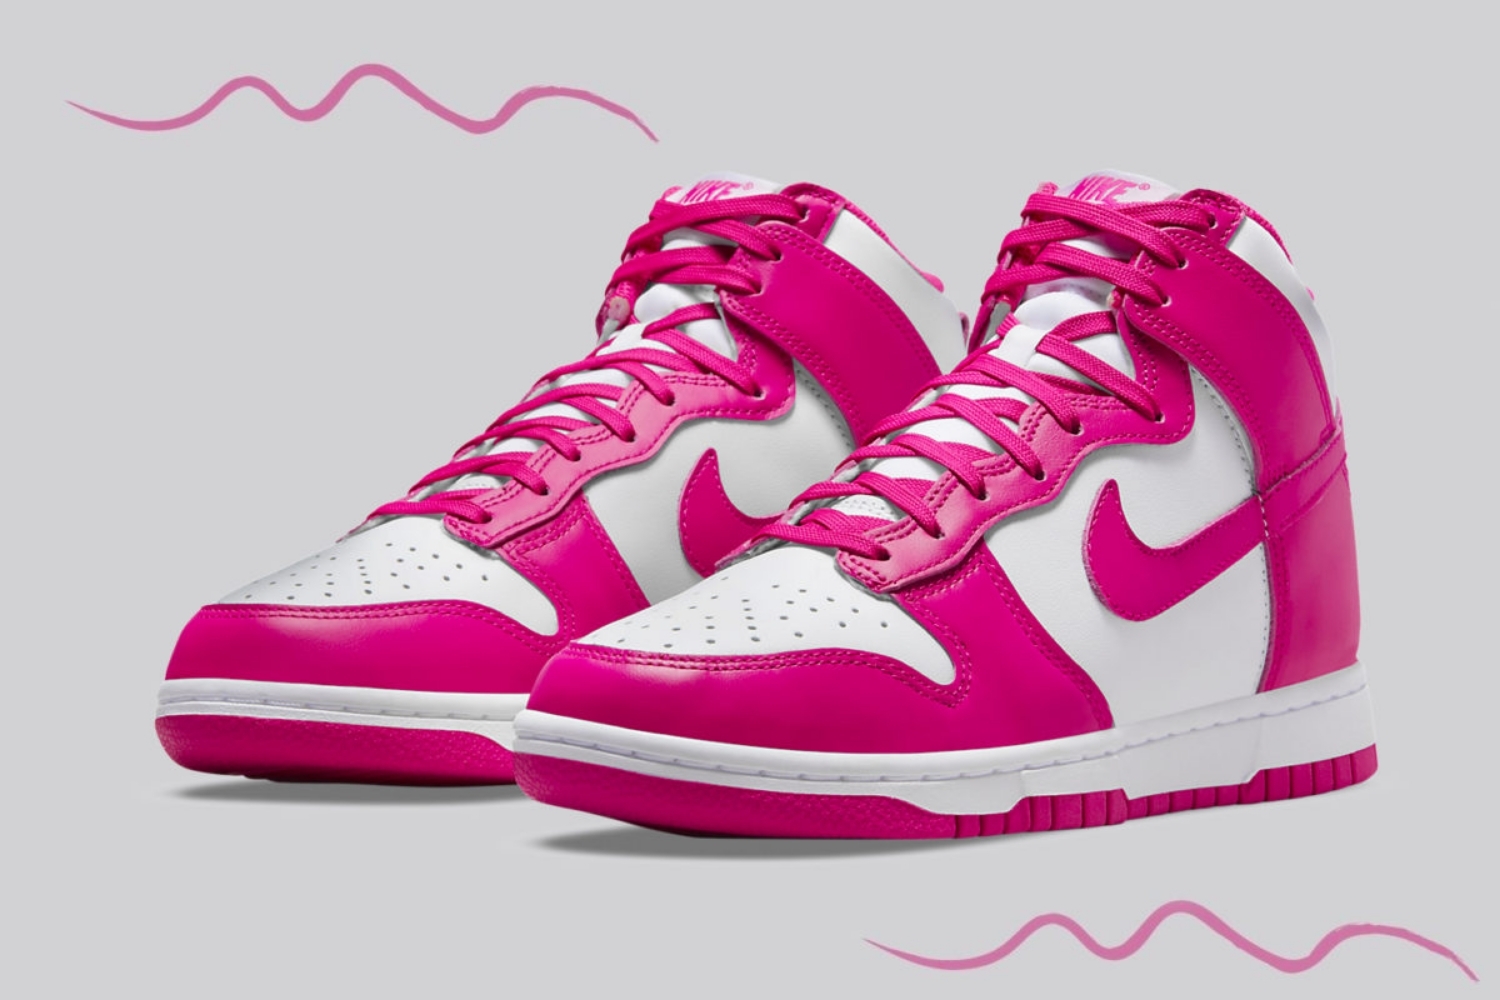 The Nike Dunk High comes with 'Pink Prime' colorway